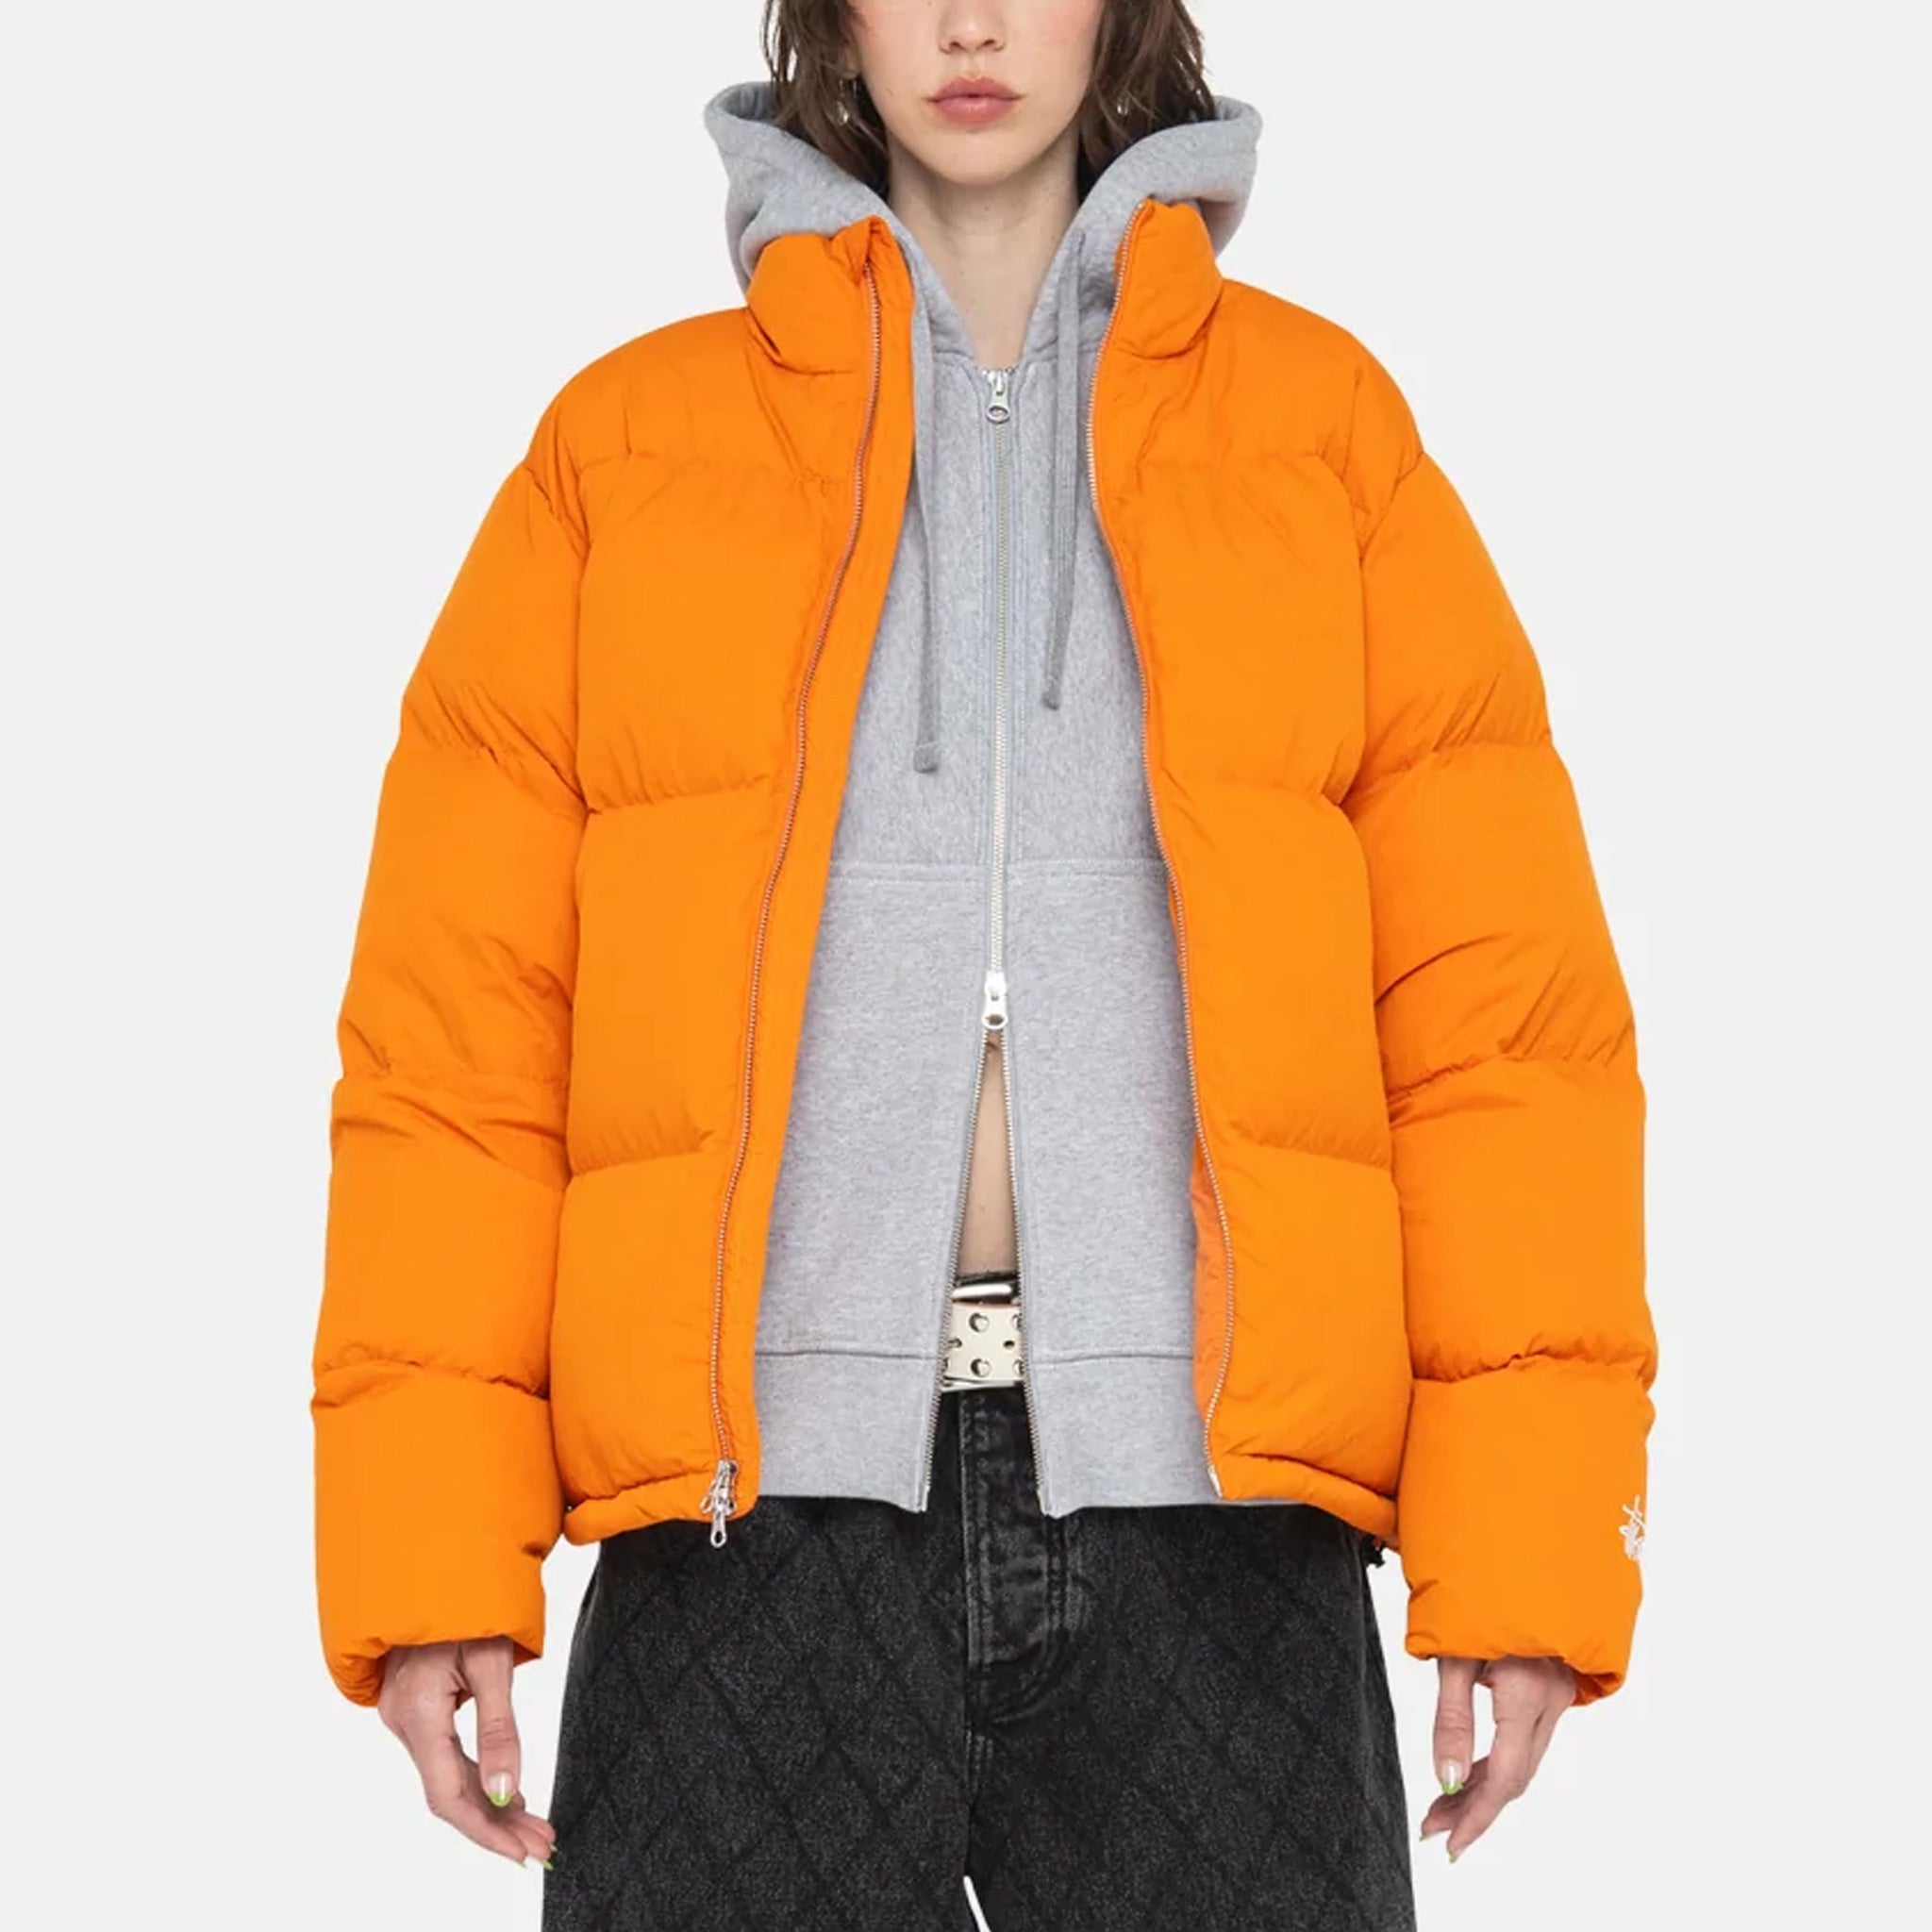 A model wears the Stussy Nylon Down Puffer jacket in orange over a grey hoodie while facing forward.